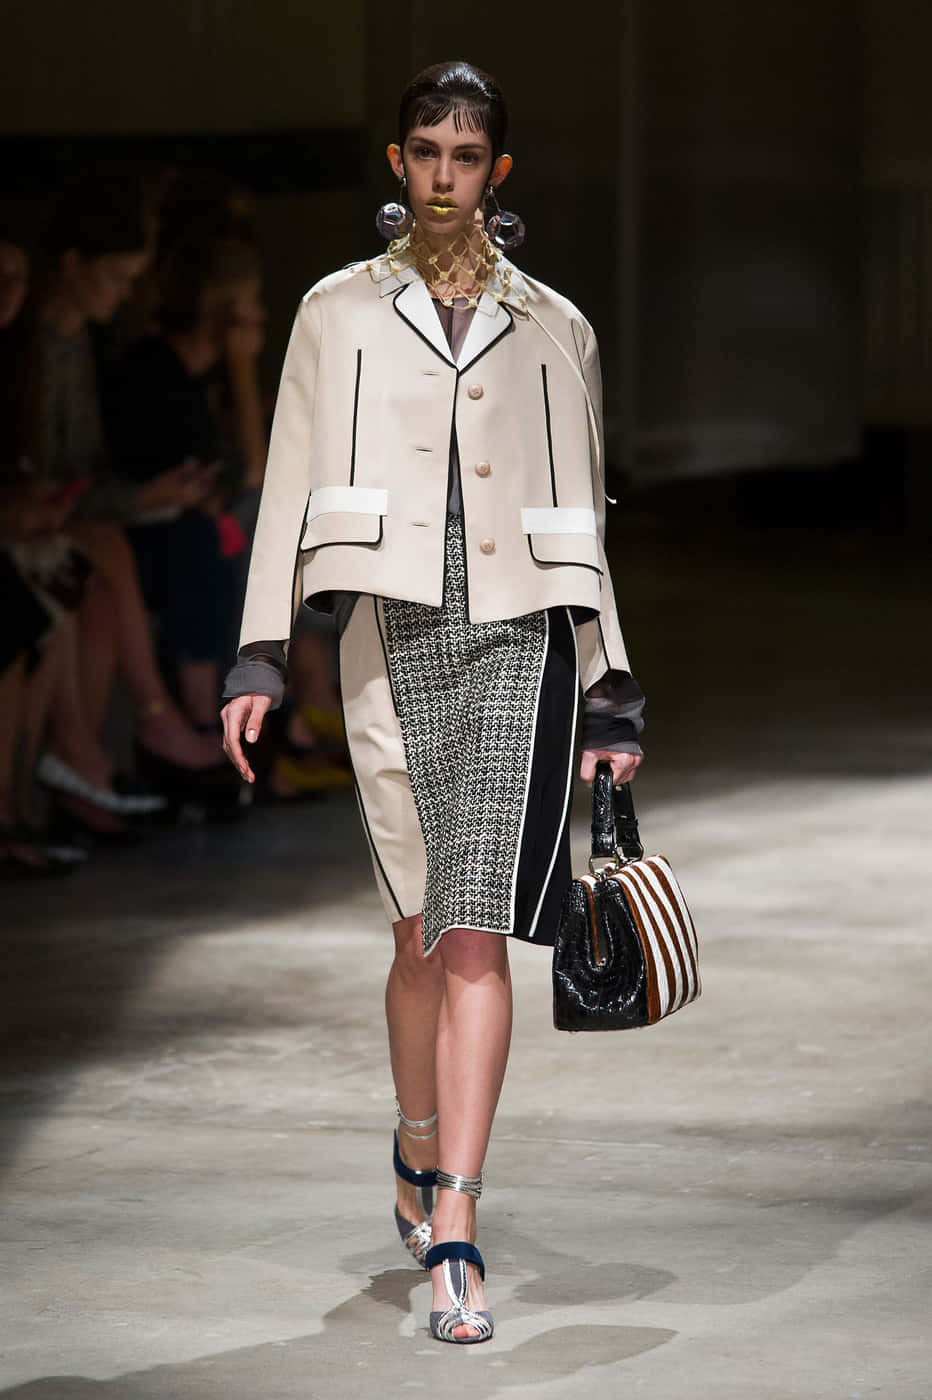 A Woman Walks Down The Runway In A Beige Jacket And Skirt